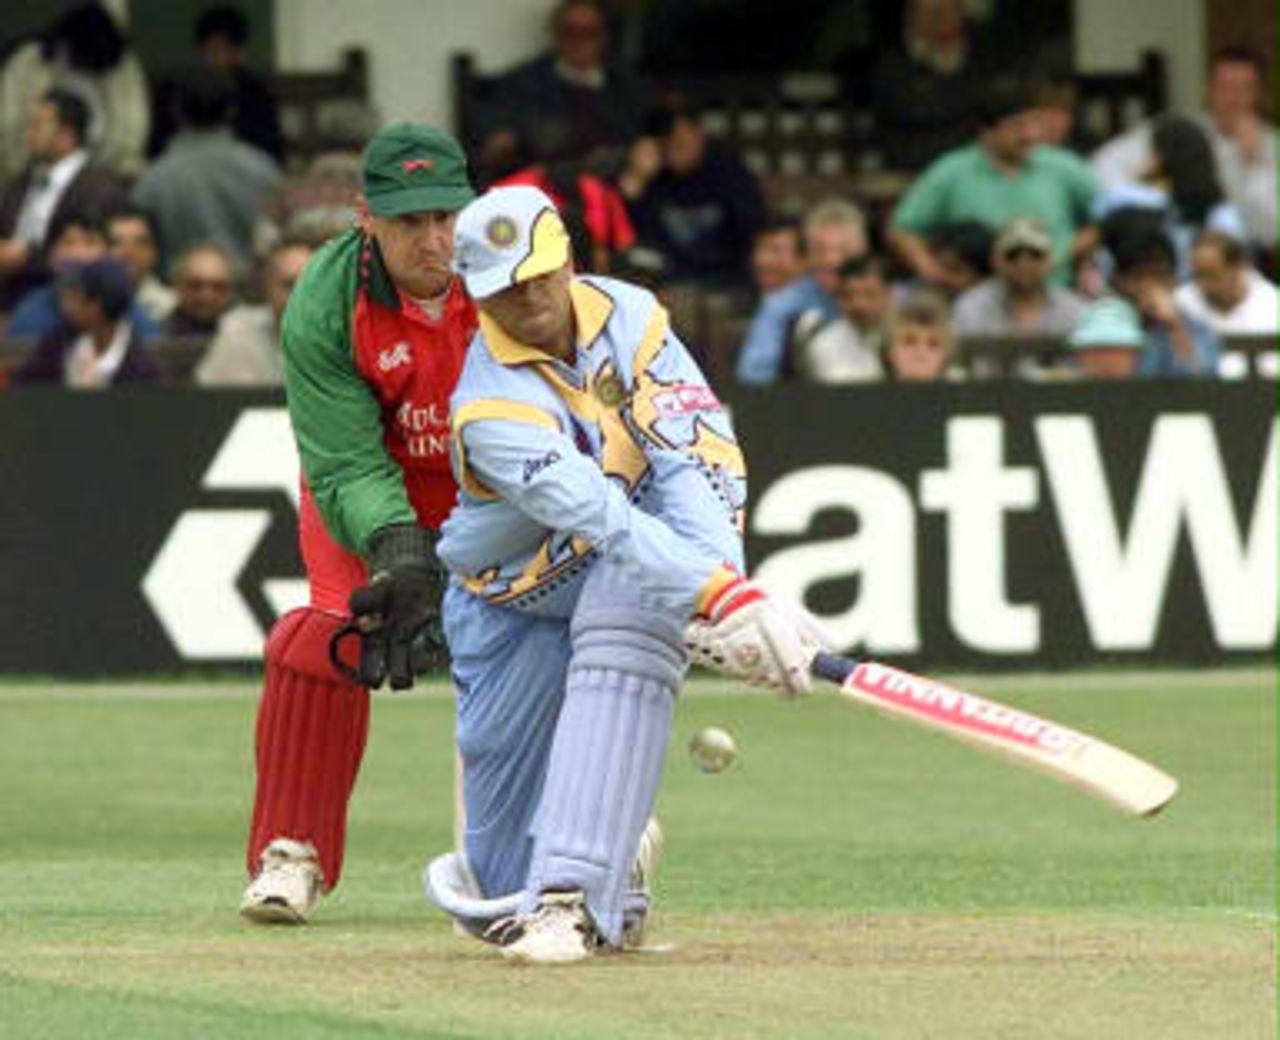 Rahul Dravid is bowled sweeping  India v Leicestershire World Cup warm-up game, May 7 1999